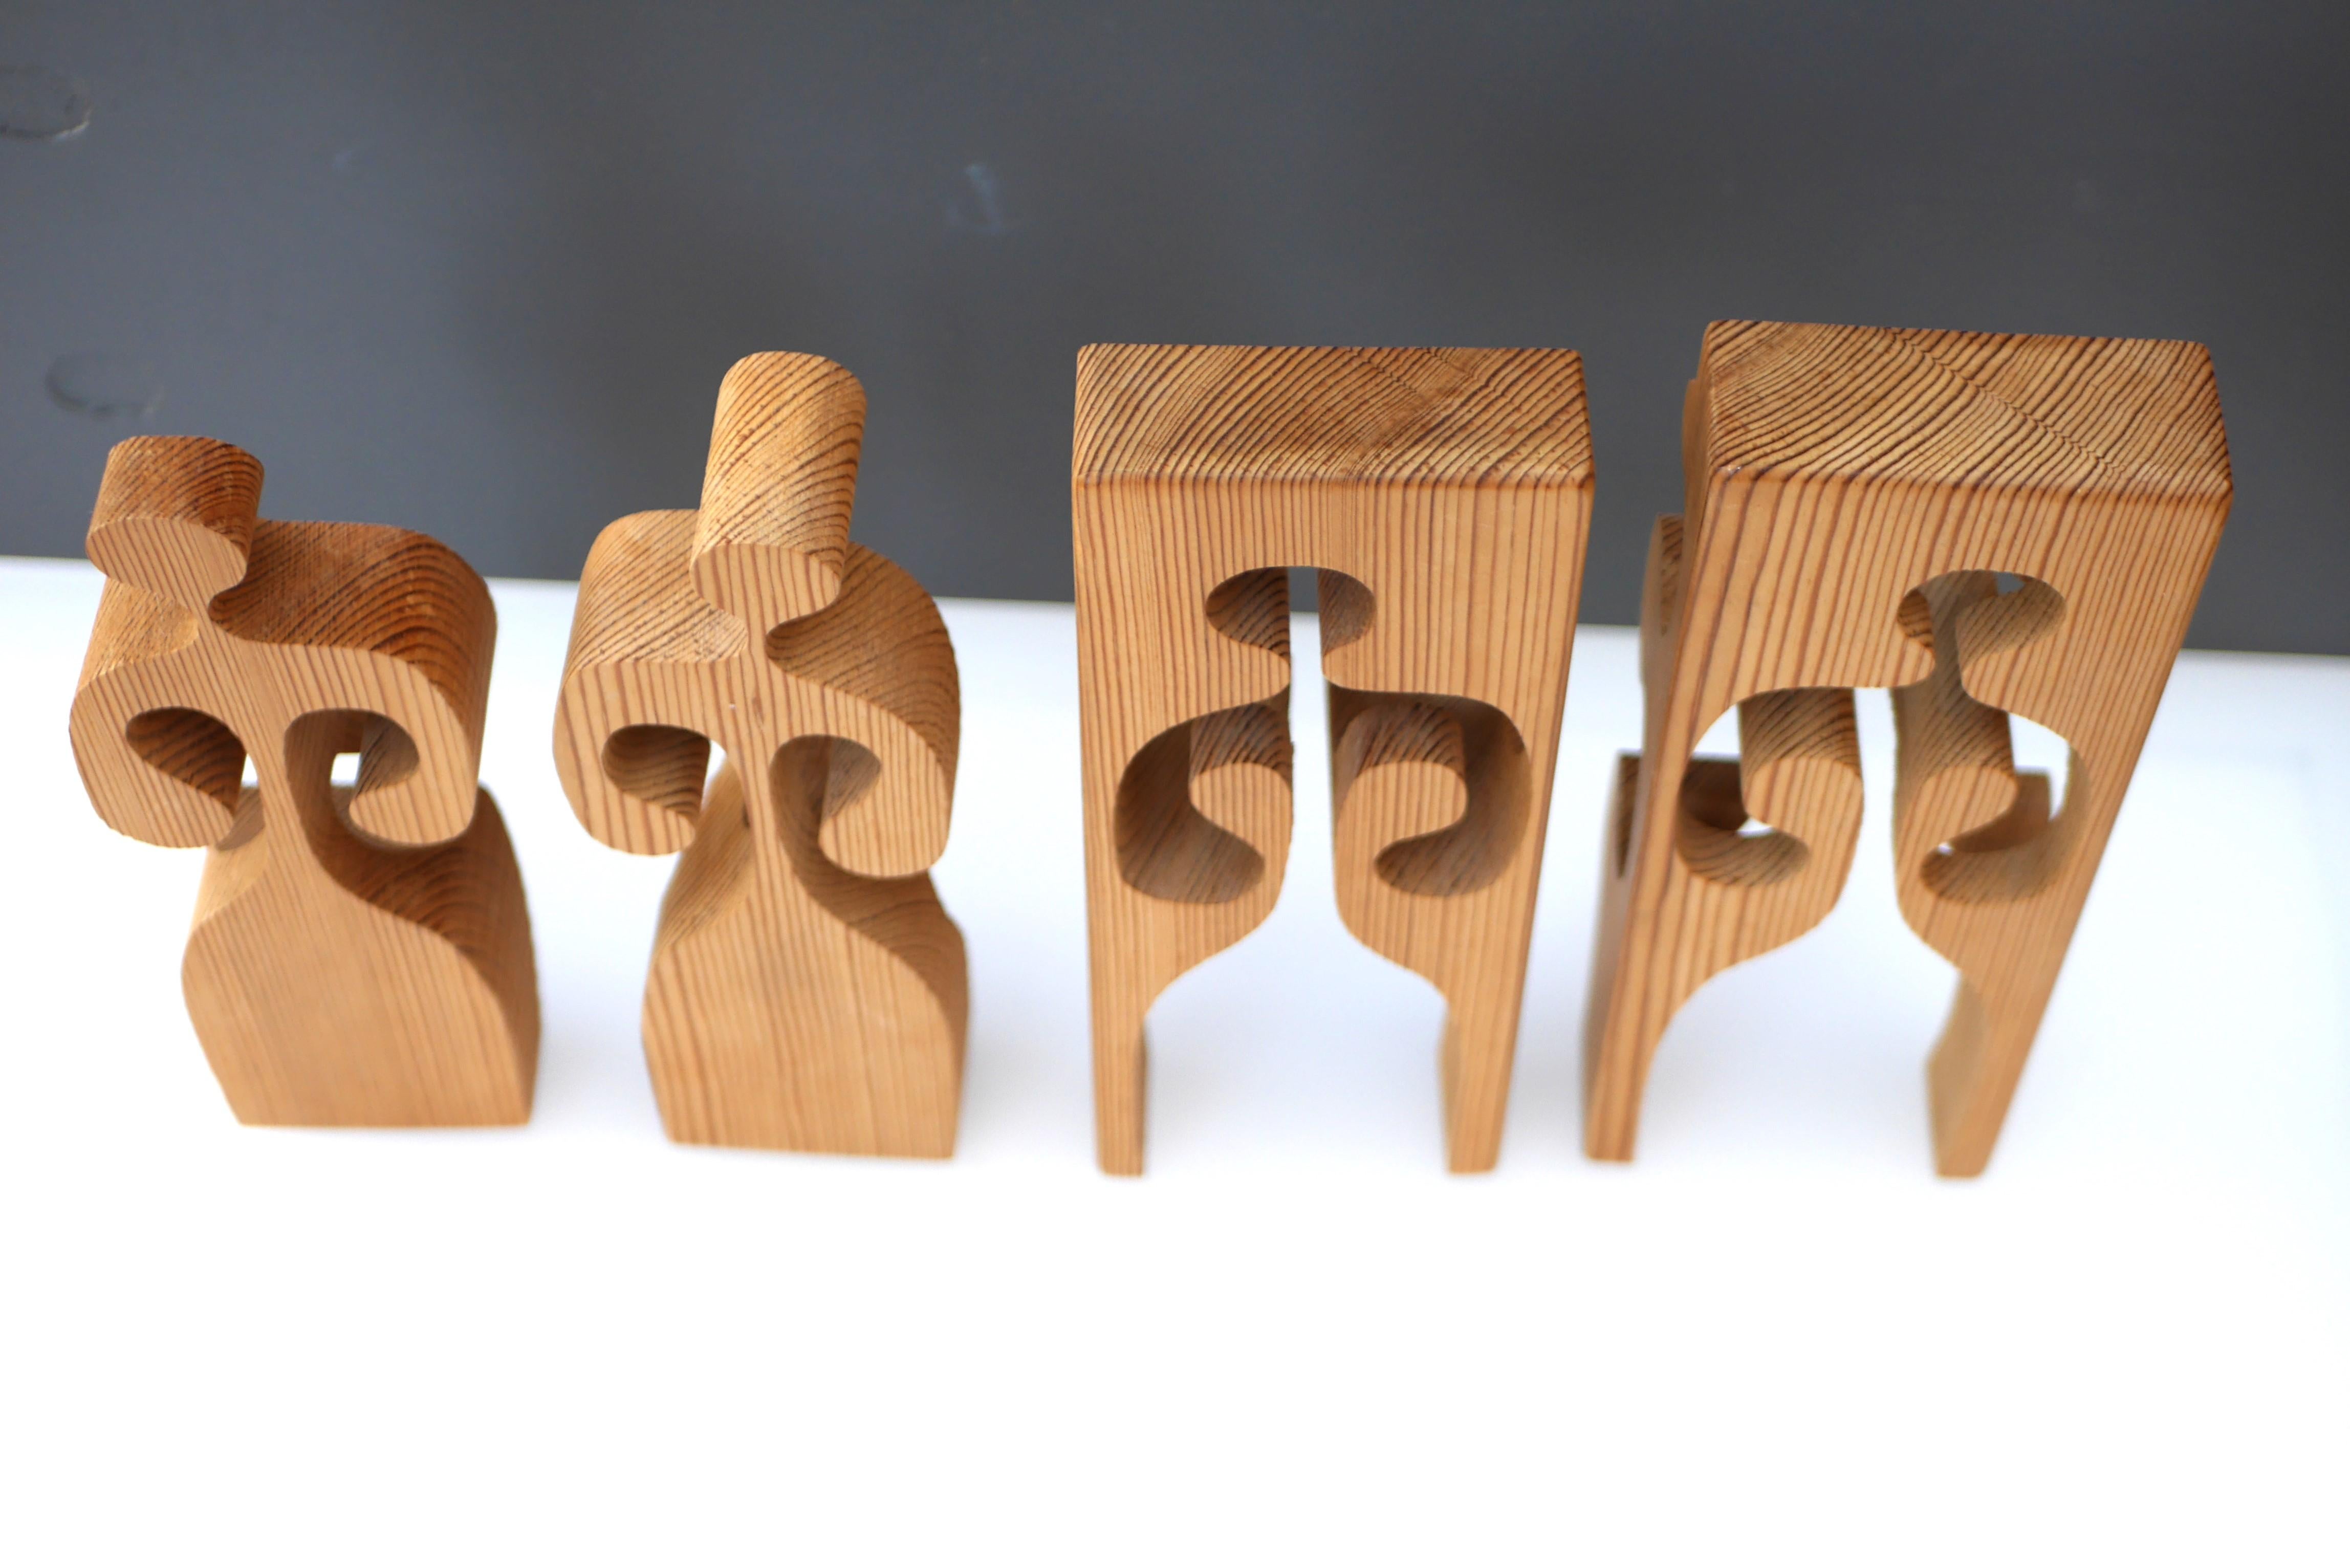 Hand-Crafted Wooden Puzzle Sculpture by Gunnar Kanevad for Gamla Linköping Sweden, 1962 For Sale